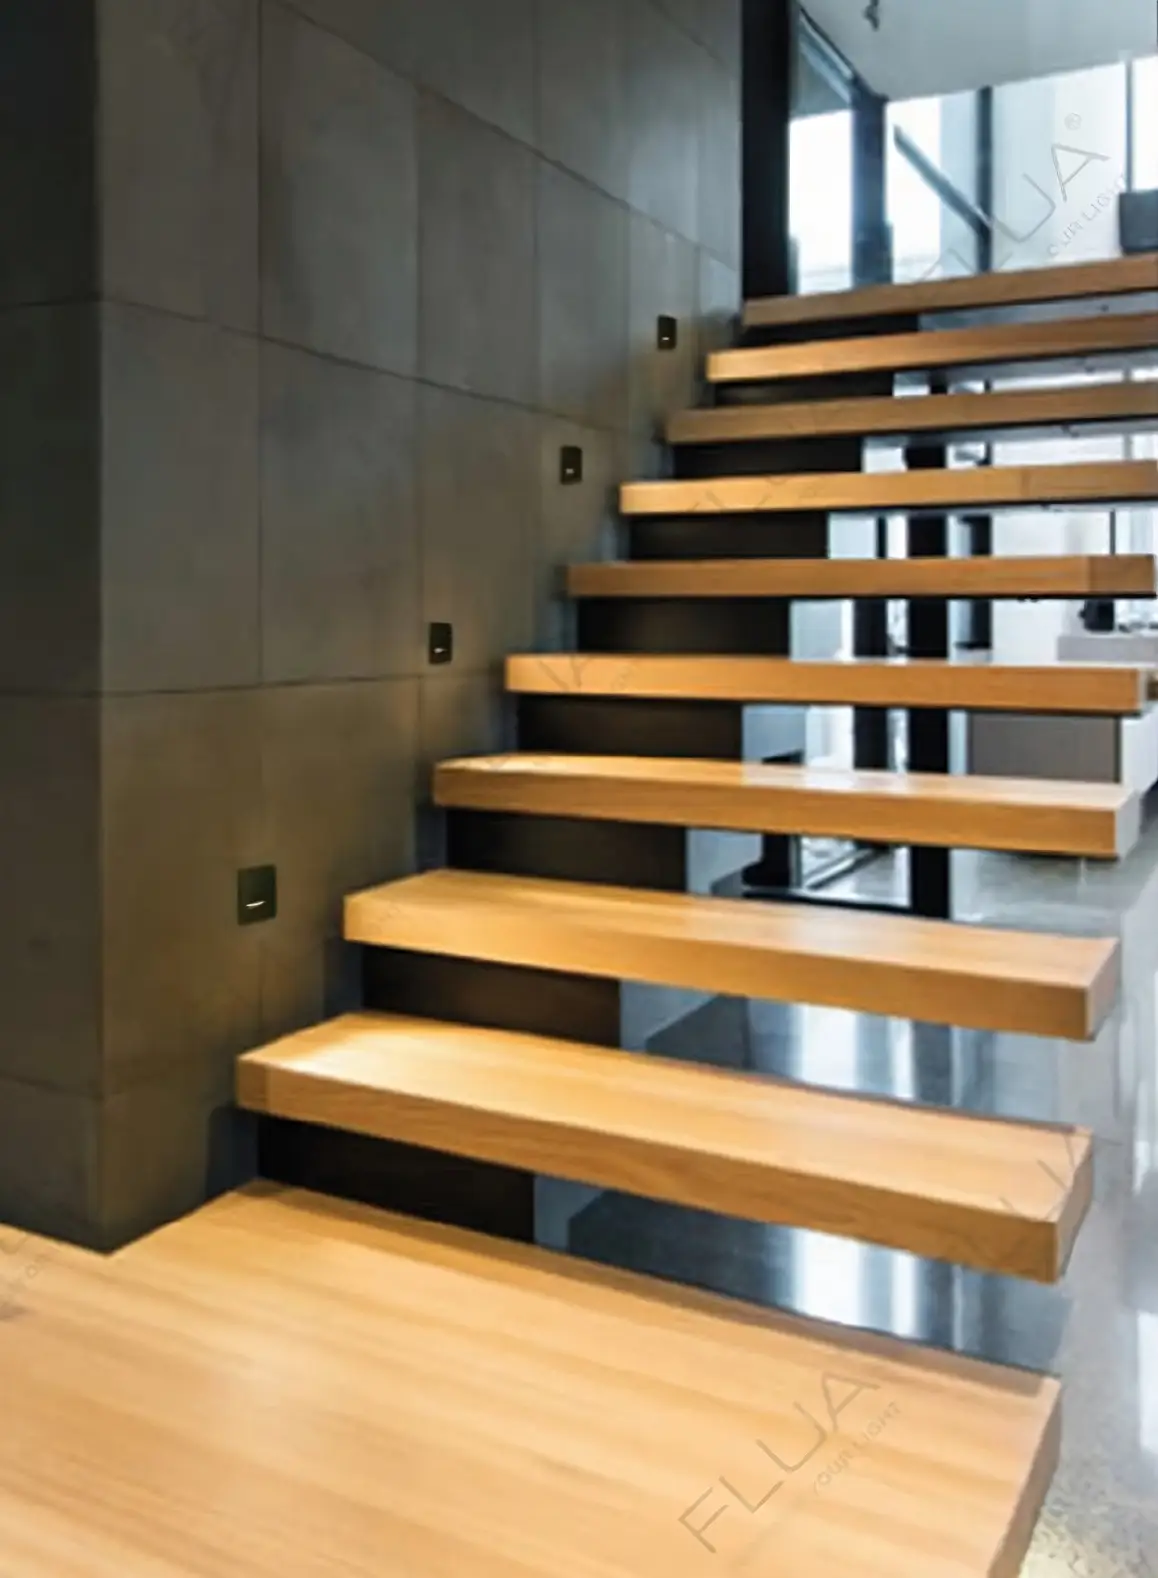 Stair Lighting: The Complete Guide to Mounting Heights, Spacing, and More